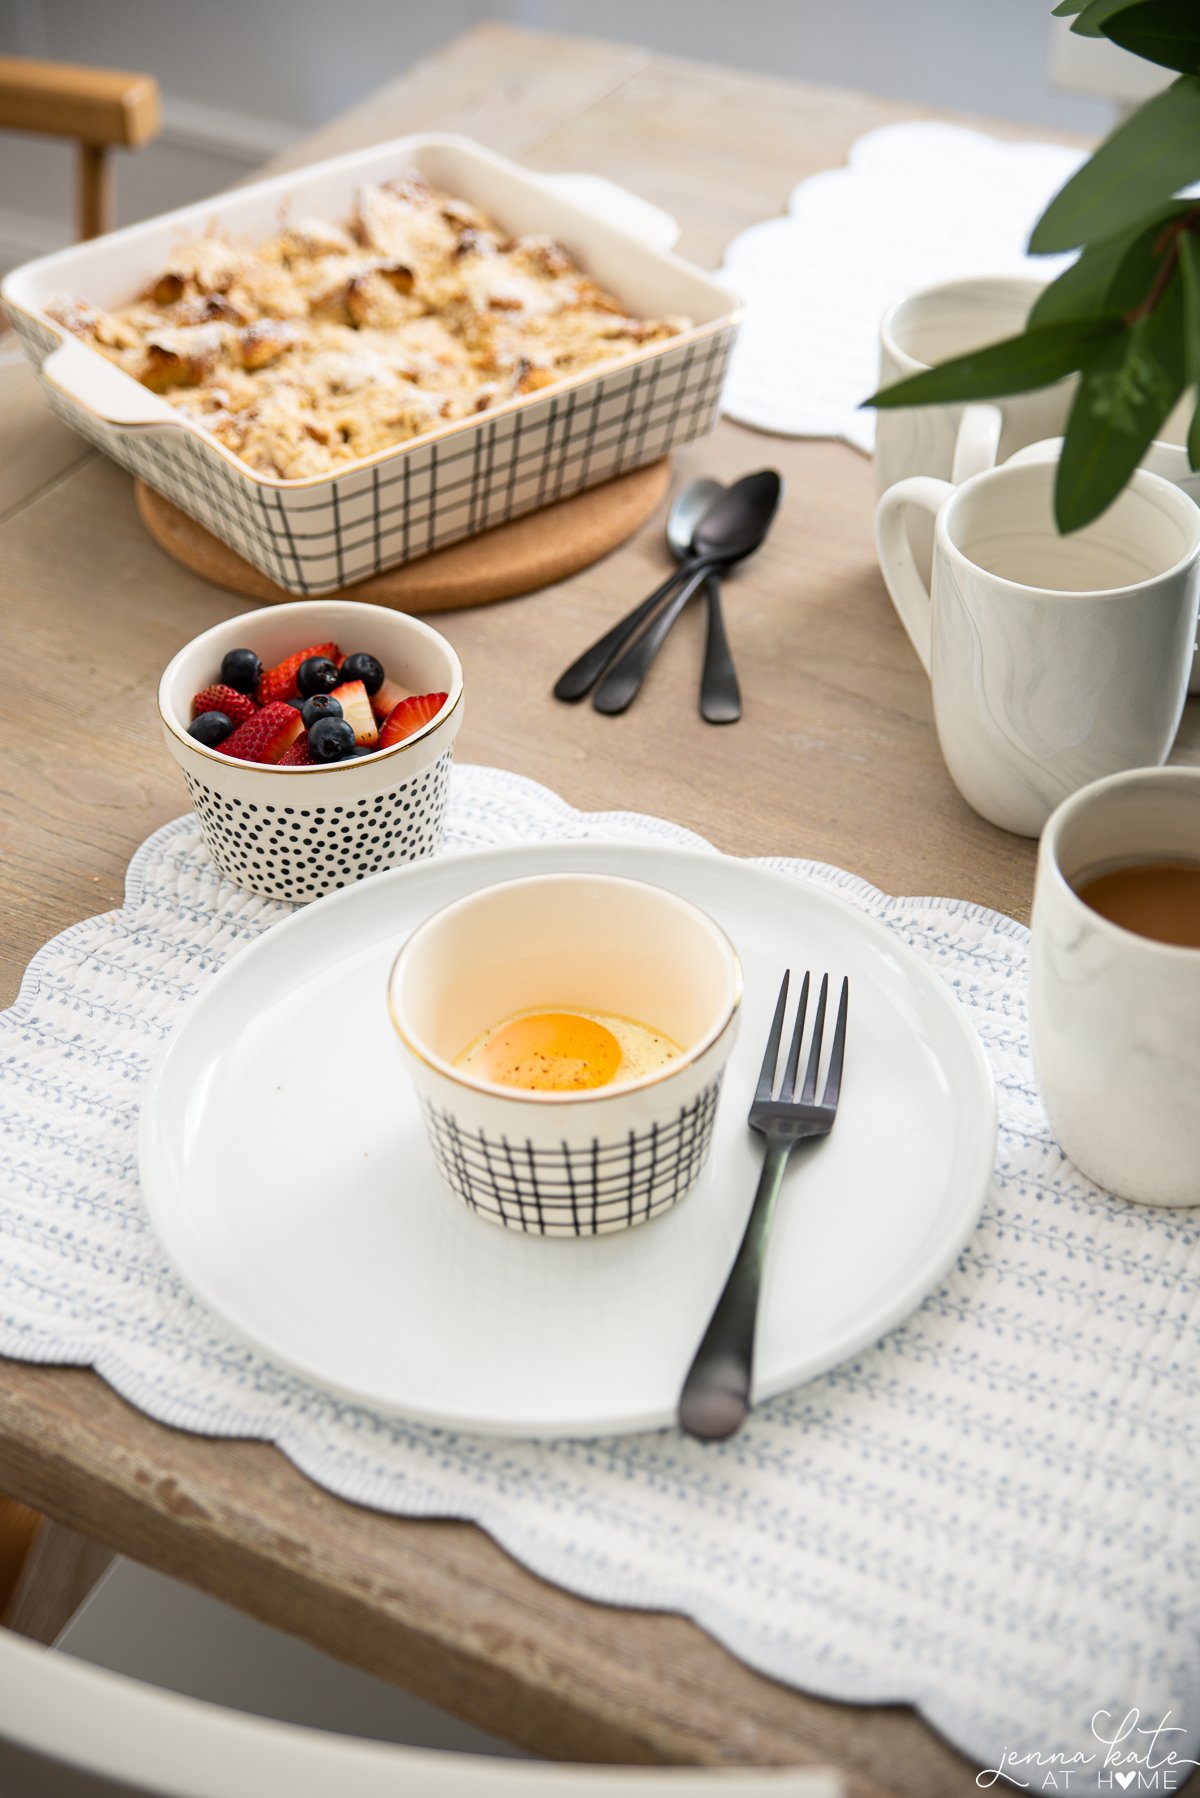 scalloped cotton placemats with a ramekin dish with a baked egg inside